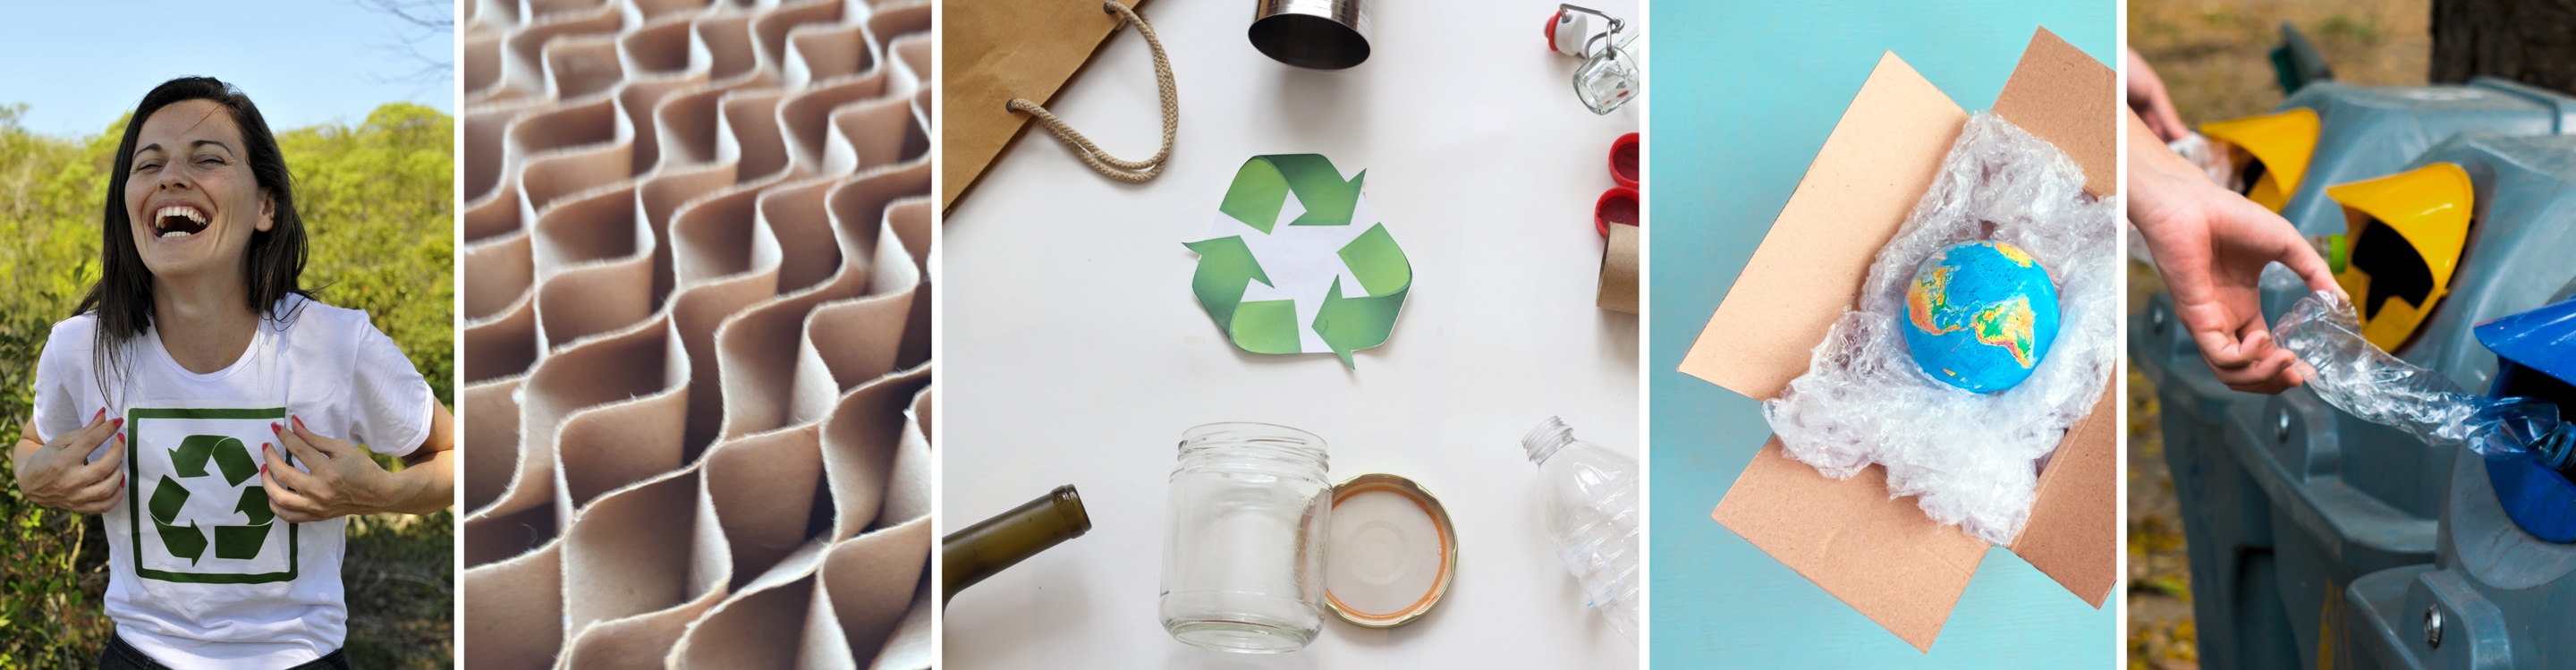 recyclable and recycled packaging